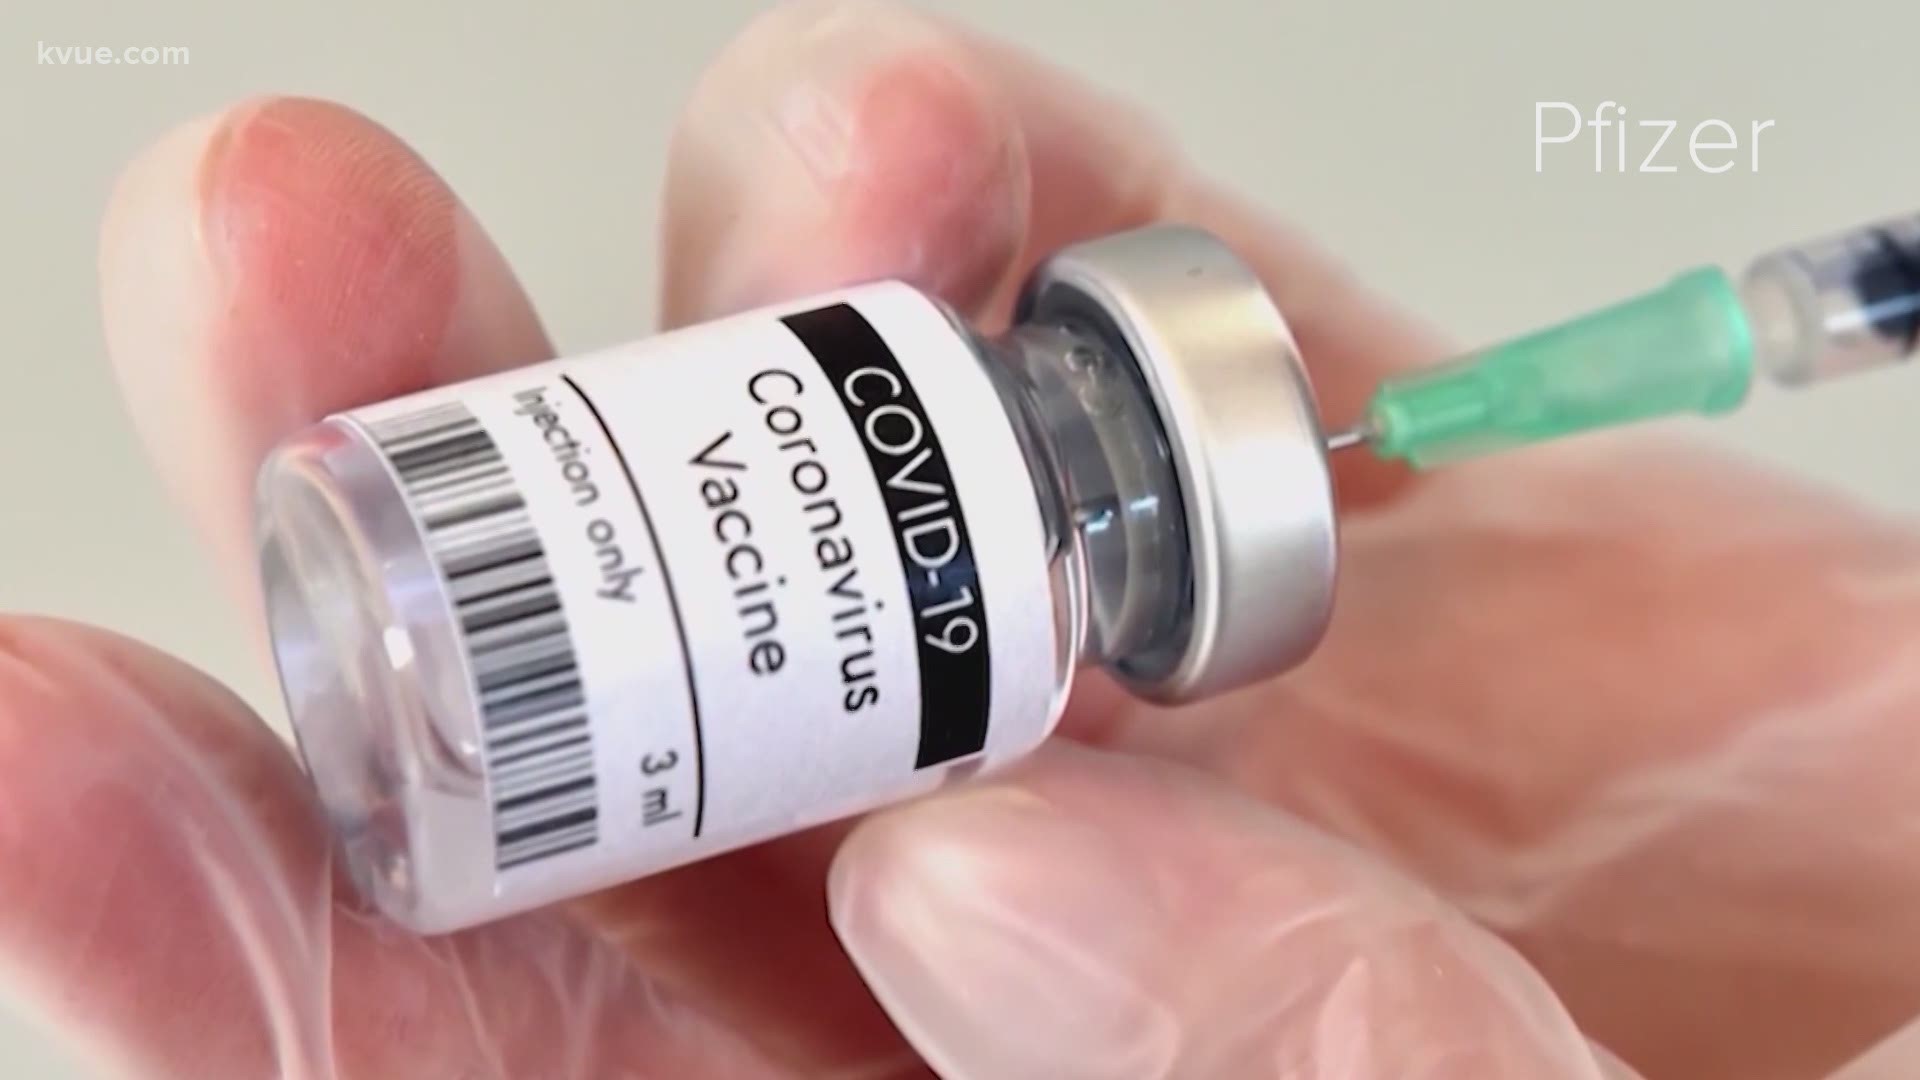 Pfizer's COVID-19 vaccine has gotten an endorsement from an FDA advisory panel. Final approval is expected soon.